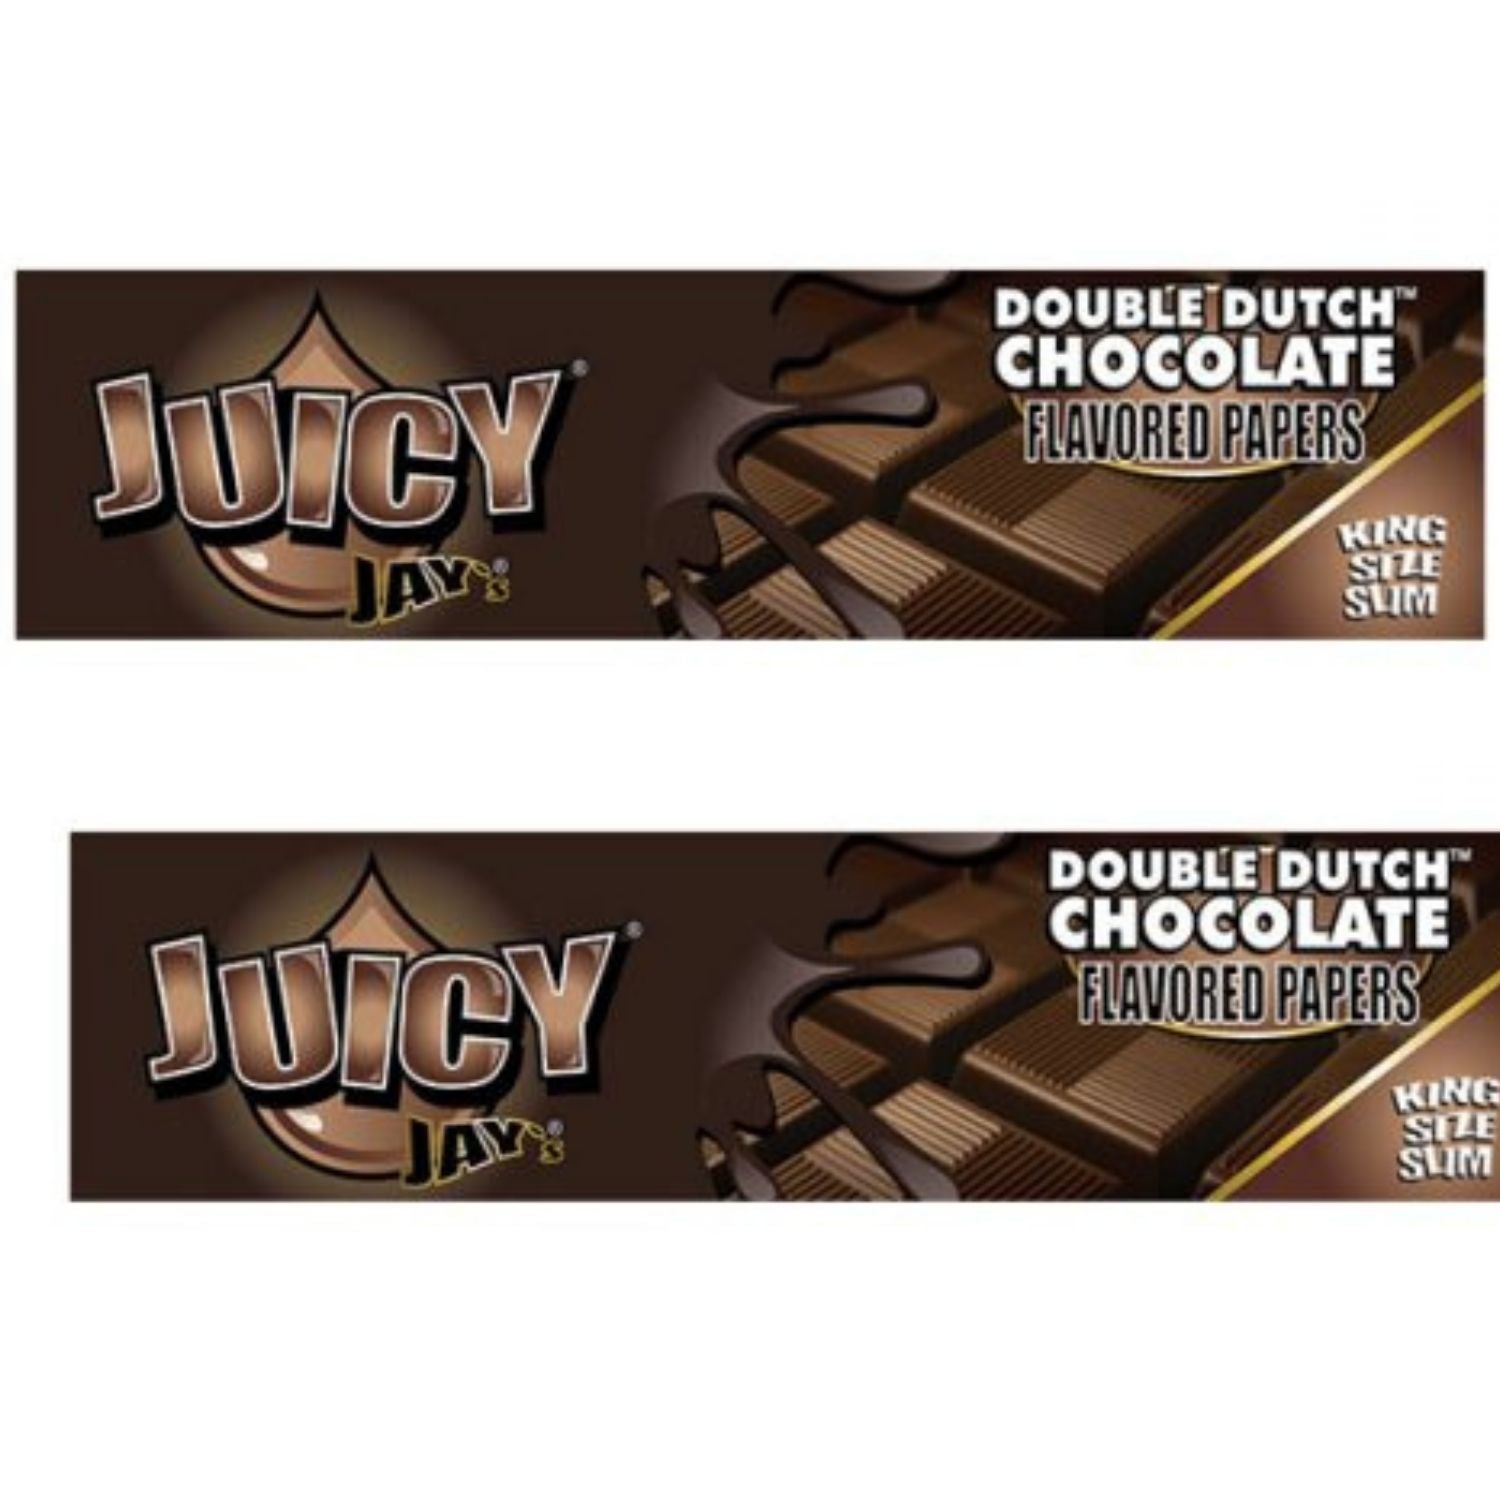 Juicy Jay Rolling Papers - Chocolate Double Dutch Flavor - KSS